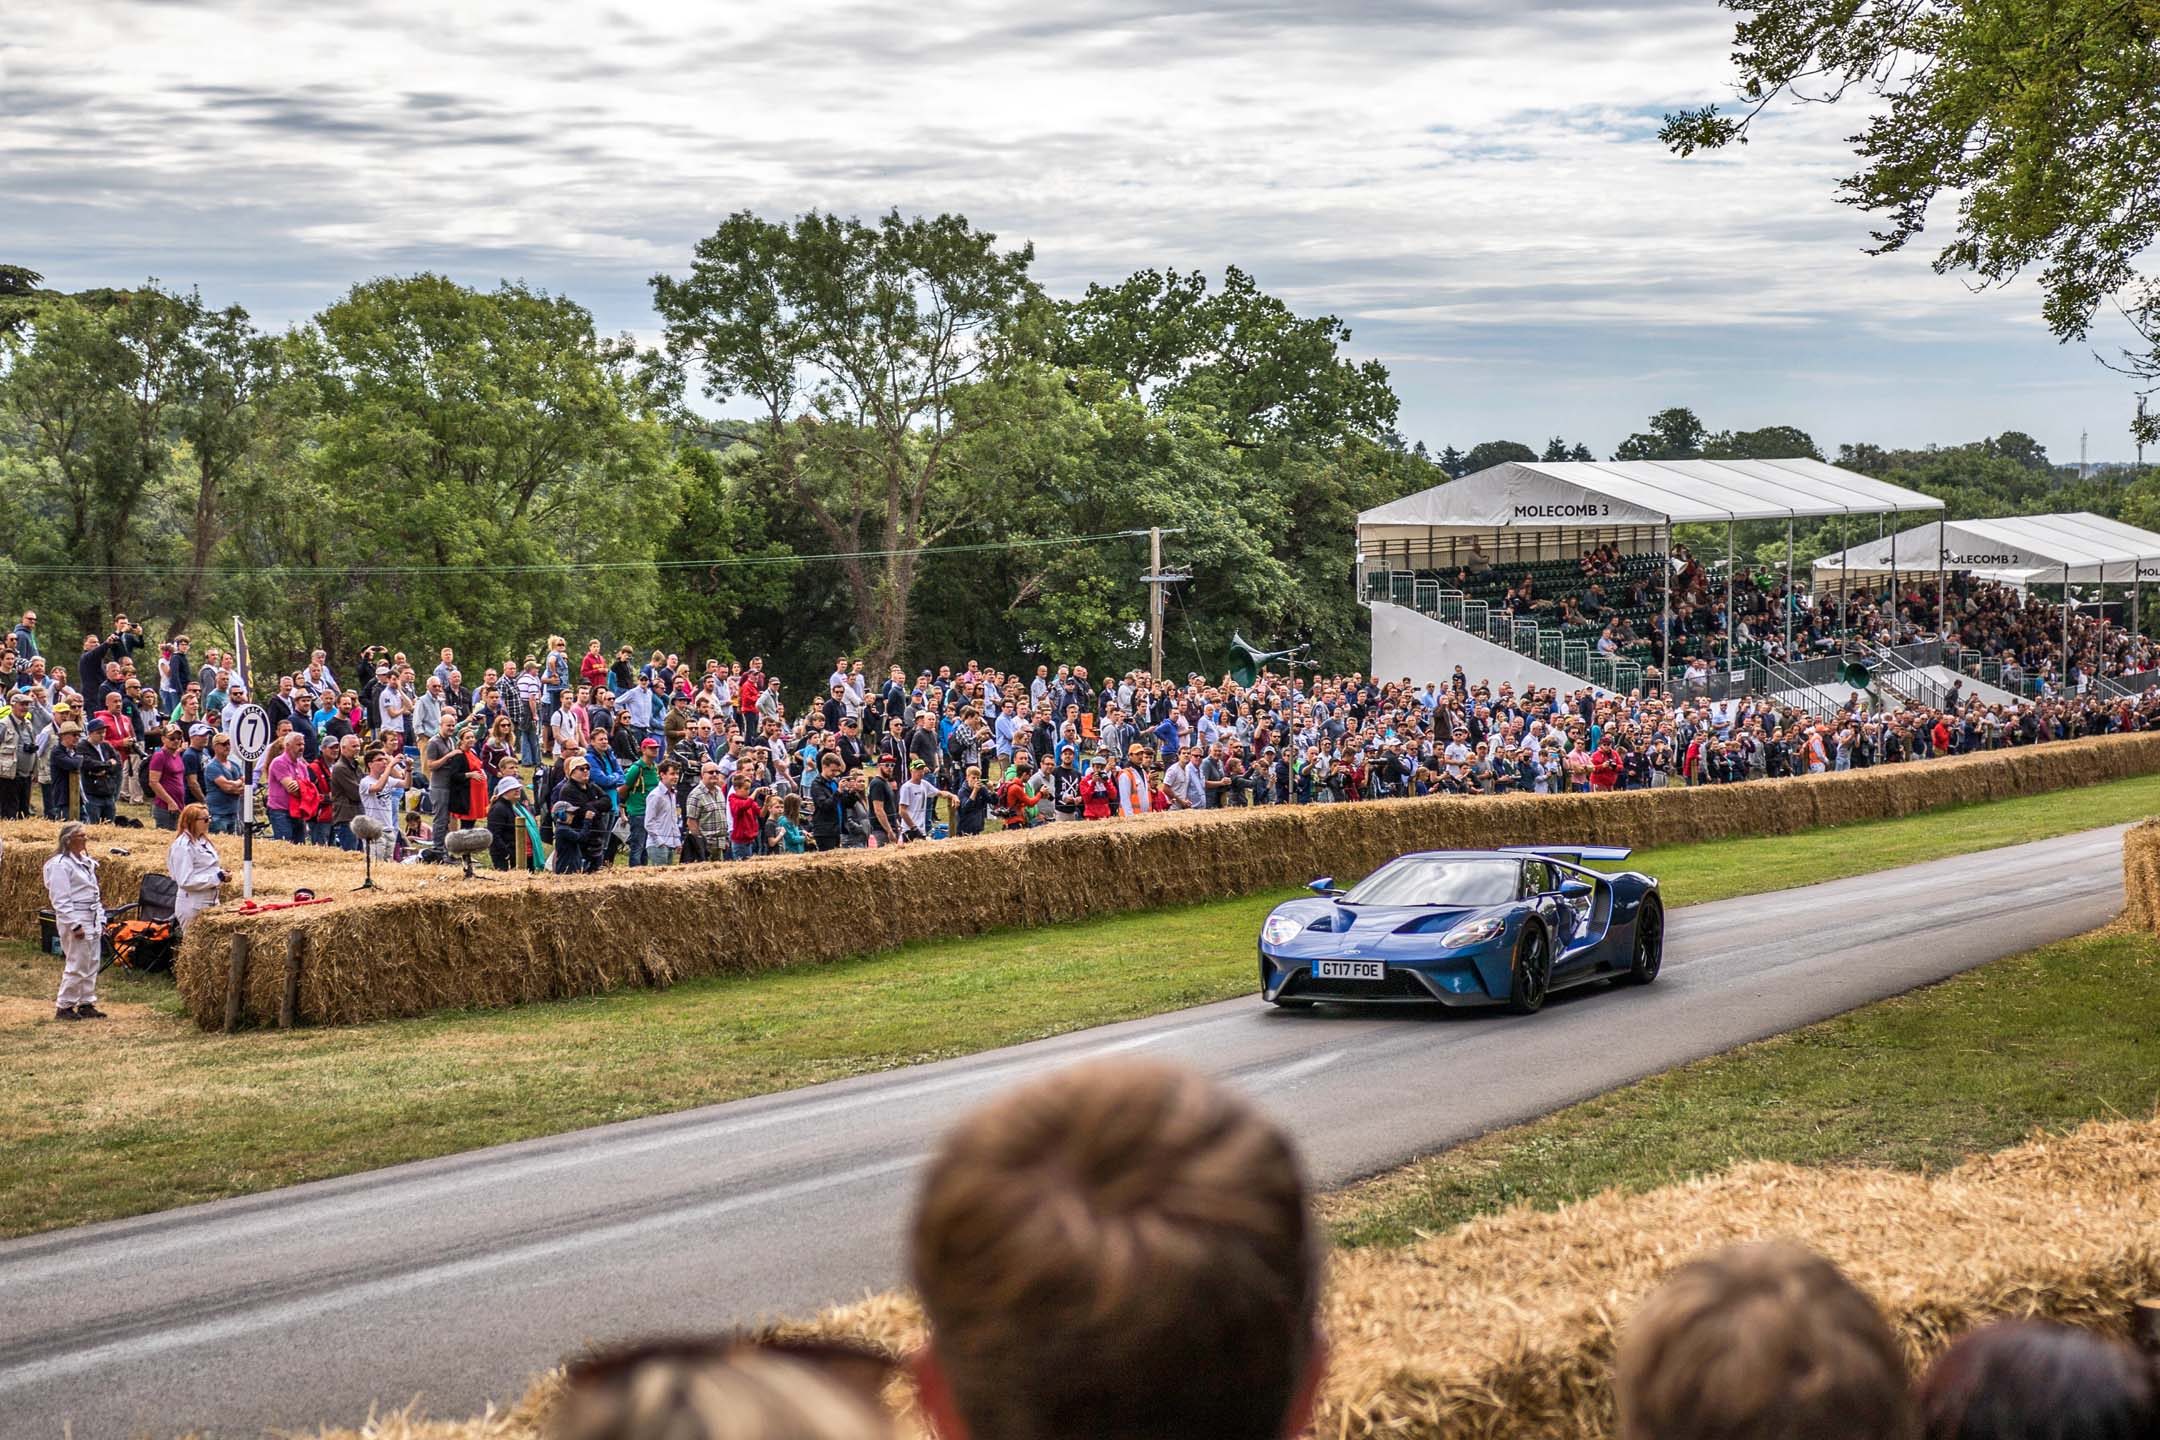 Along with all the historic stuff, a new challenger appears. The Ford GT attracted plenty of crowds in the paddock, and practically flew up the hill. Not too many onlookers seemed to know it was built in Canada.